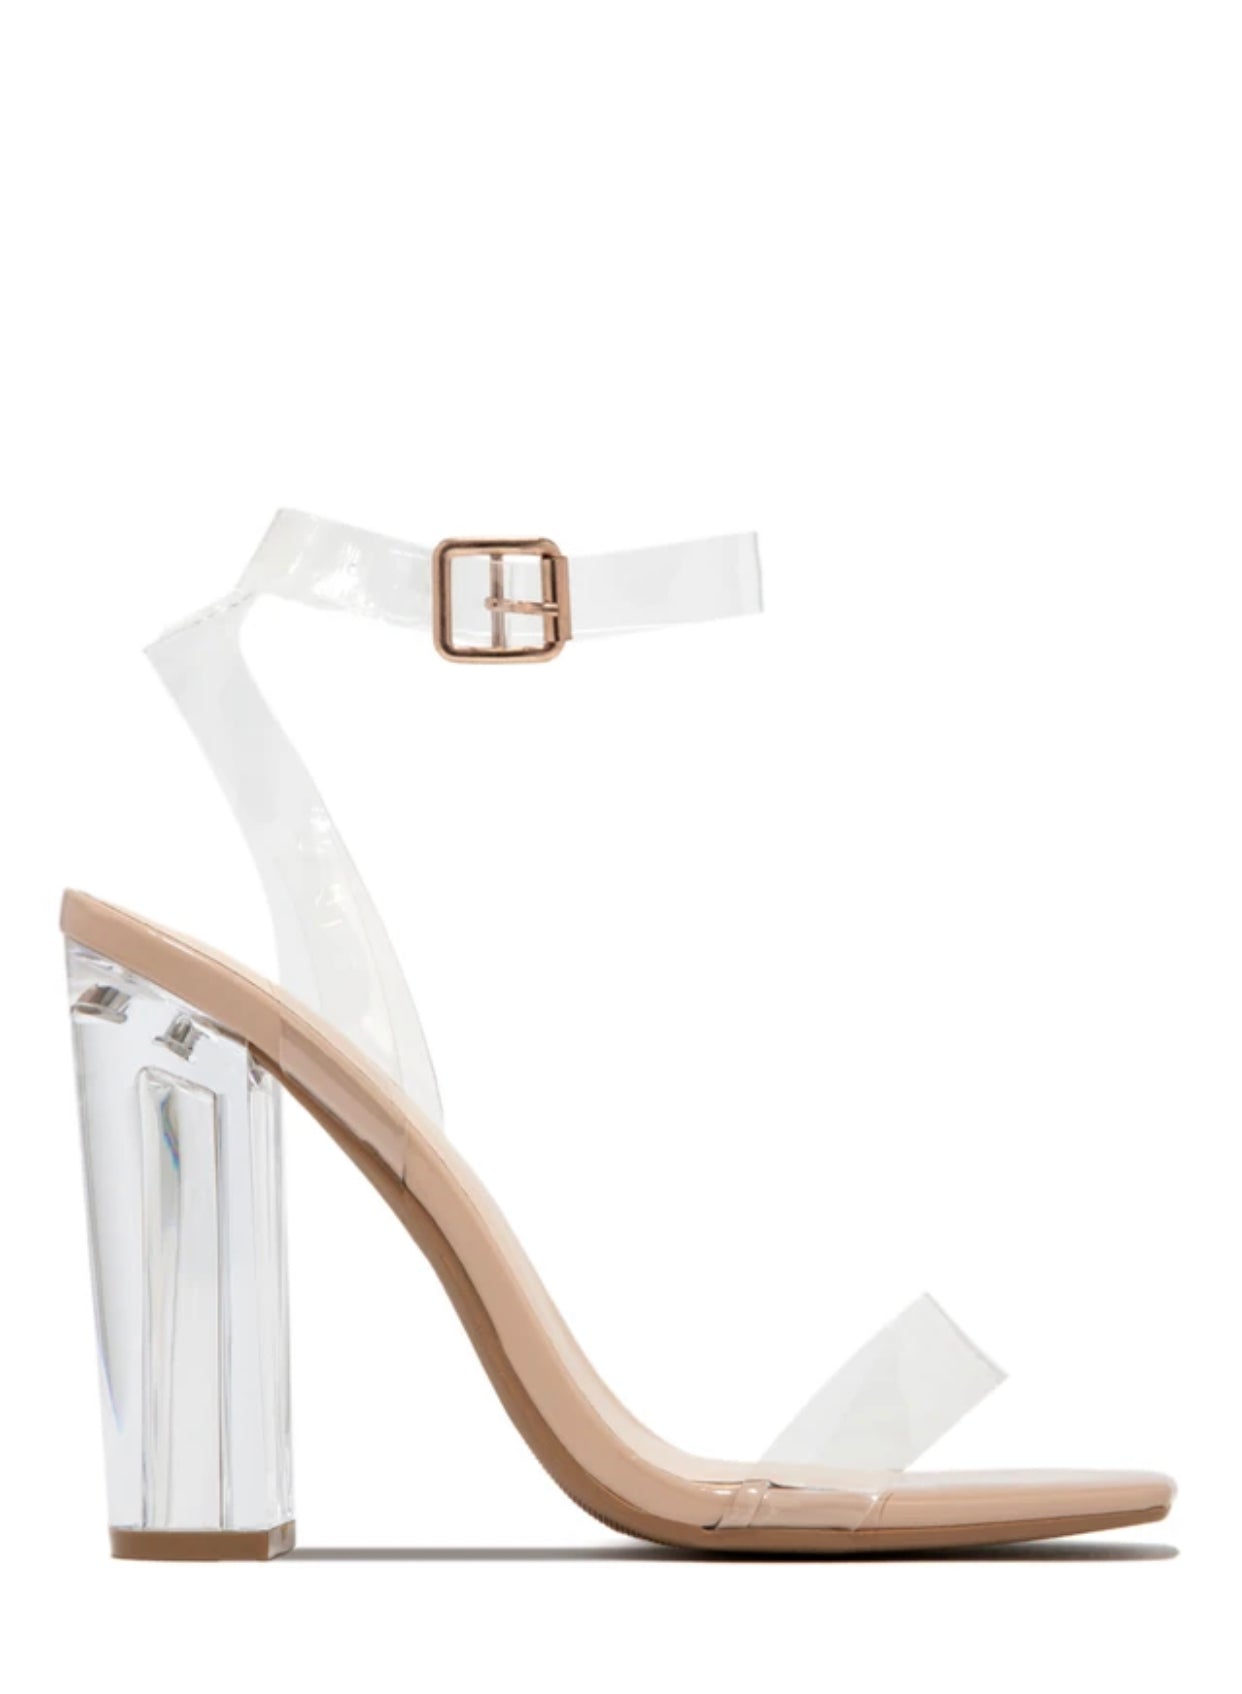 Crystal Clear Chunky Heels-Nude - Impoze Style™